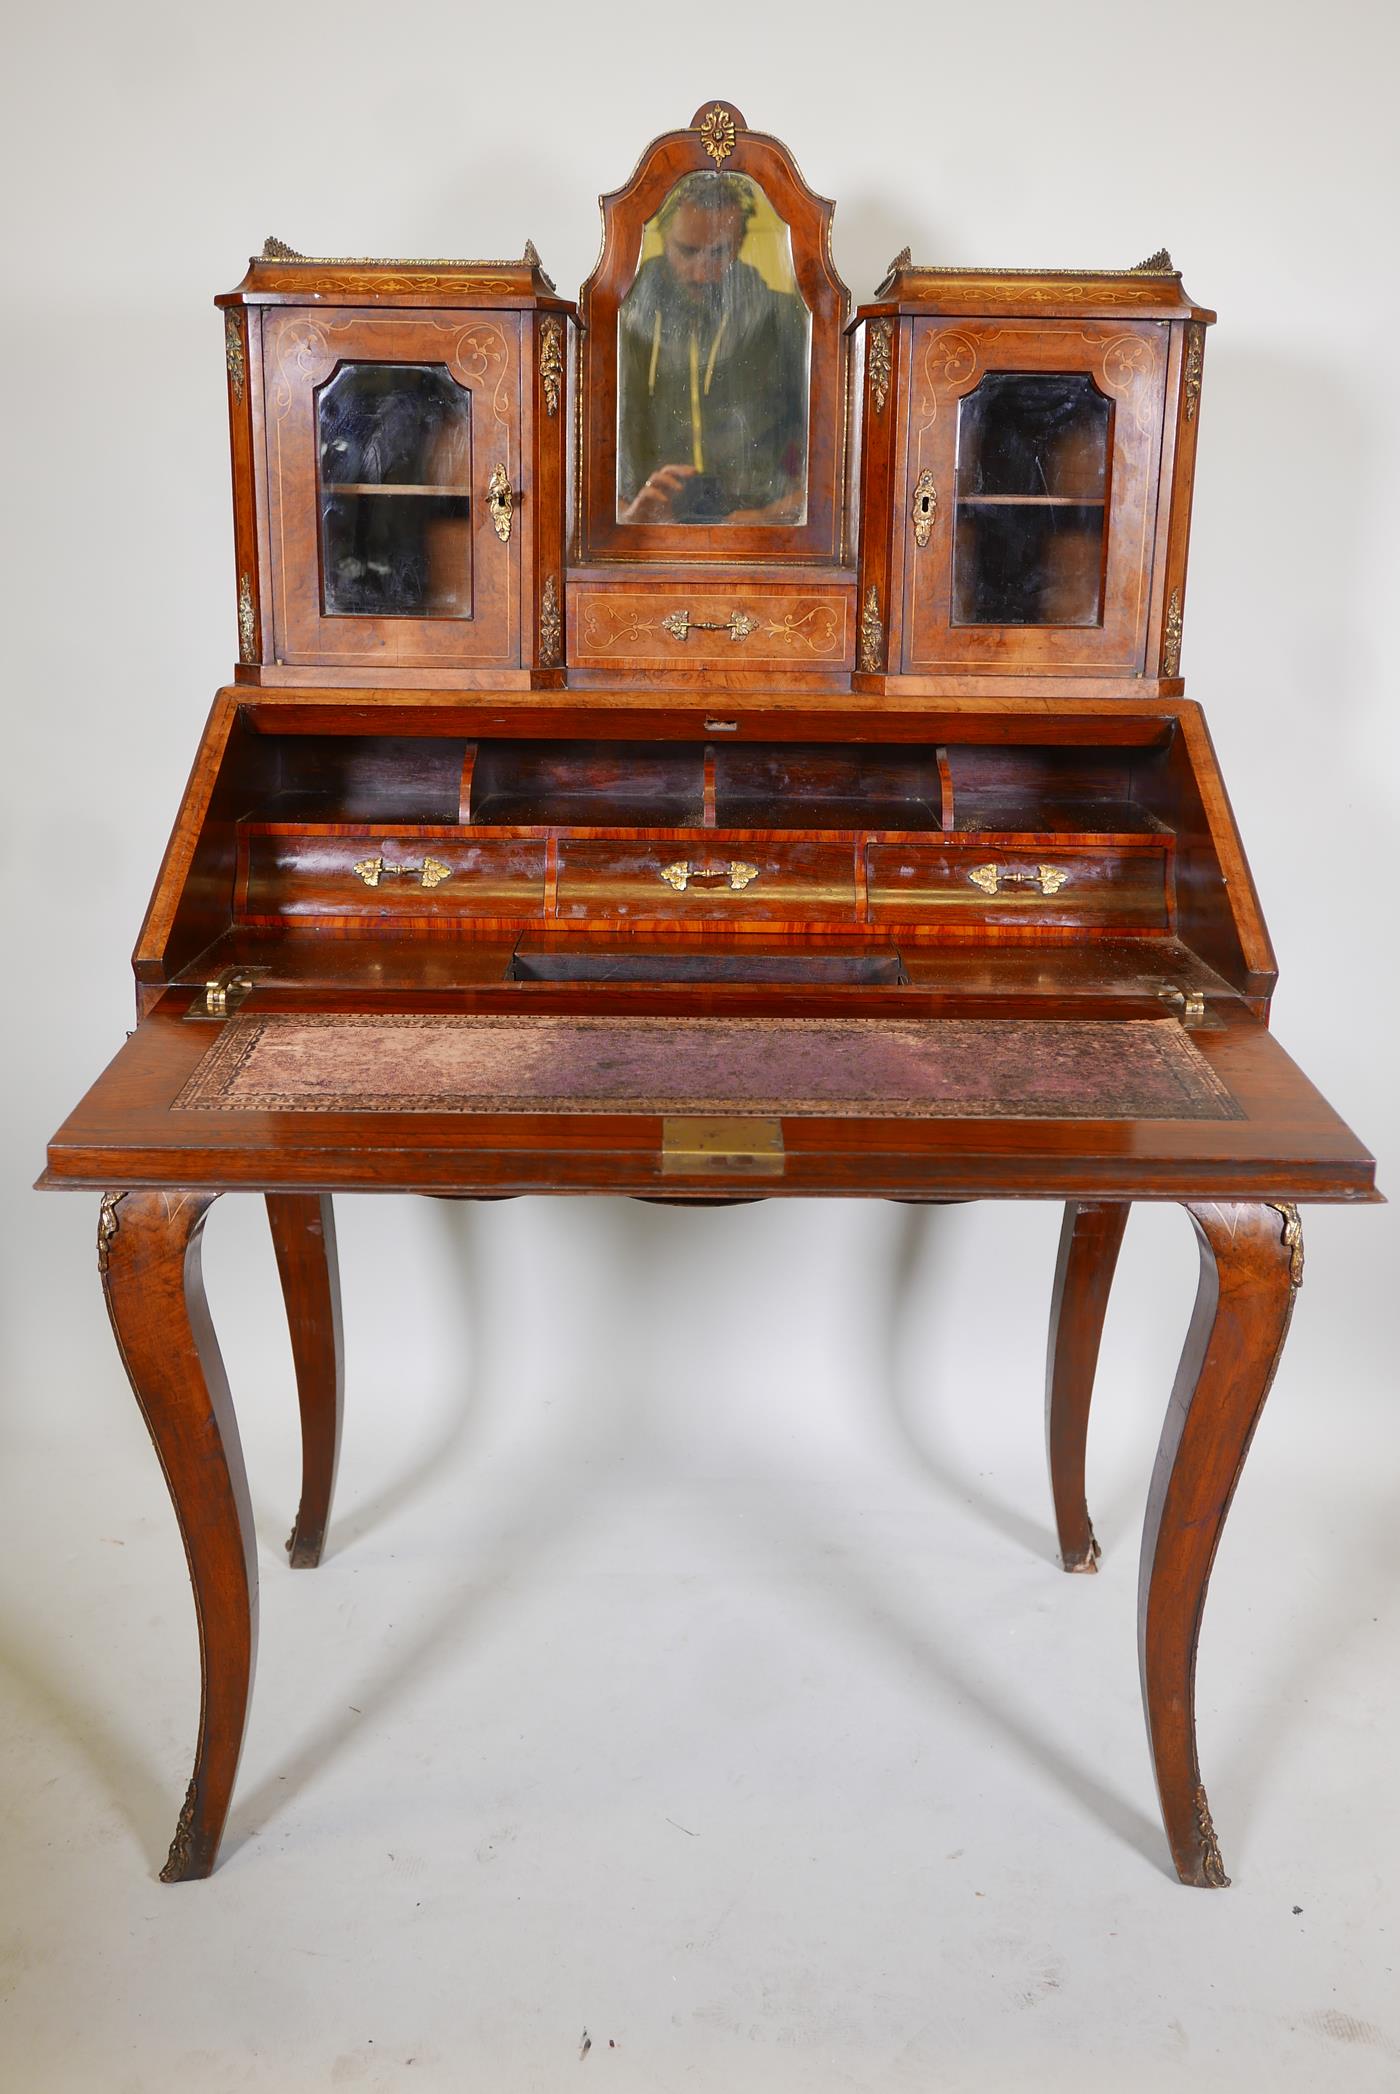 A Victorian inlaid, figured and burr walnut bonne-heure-de jour, with a brass galleried top and - Image 4 of 7